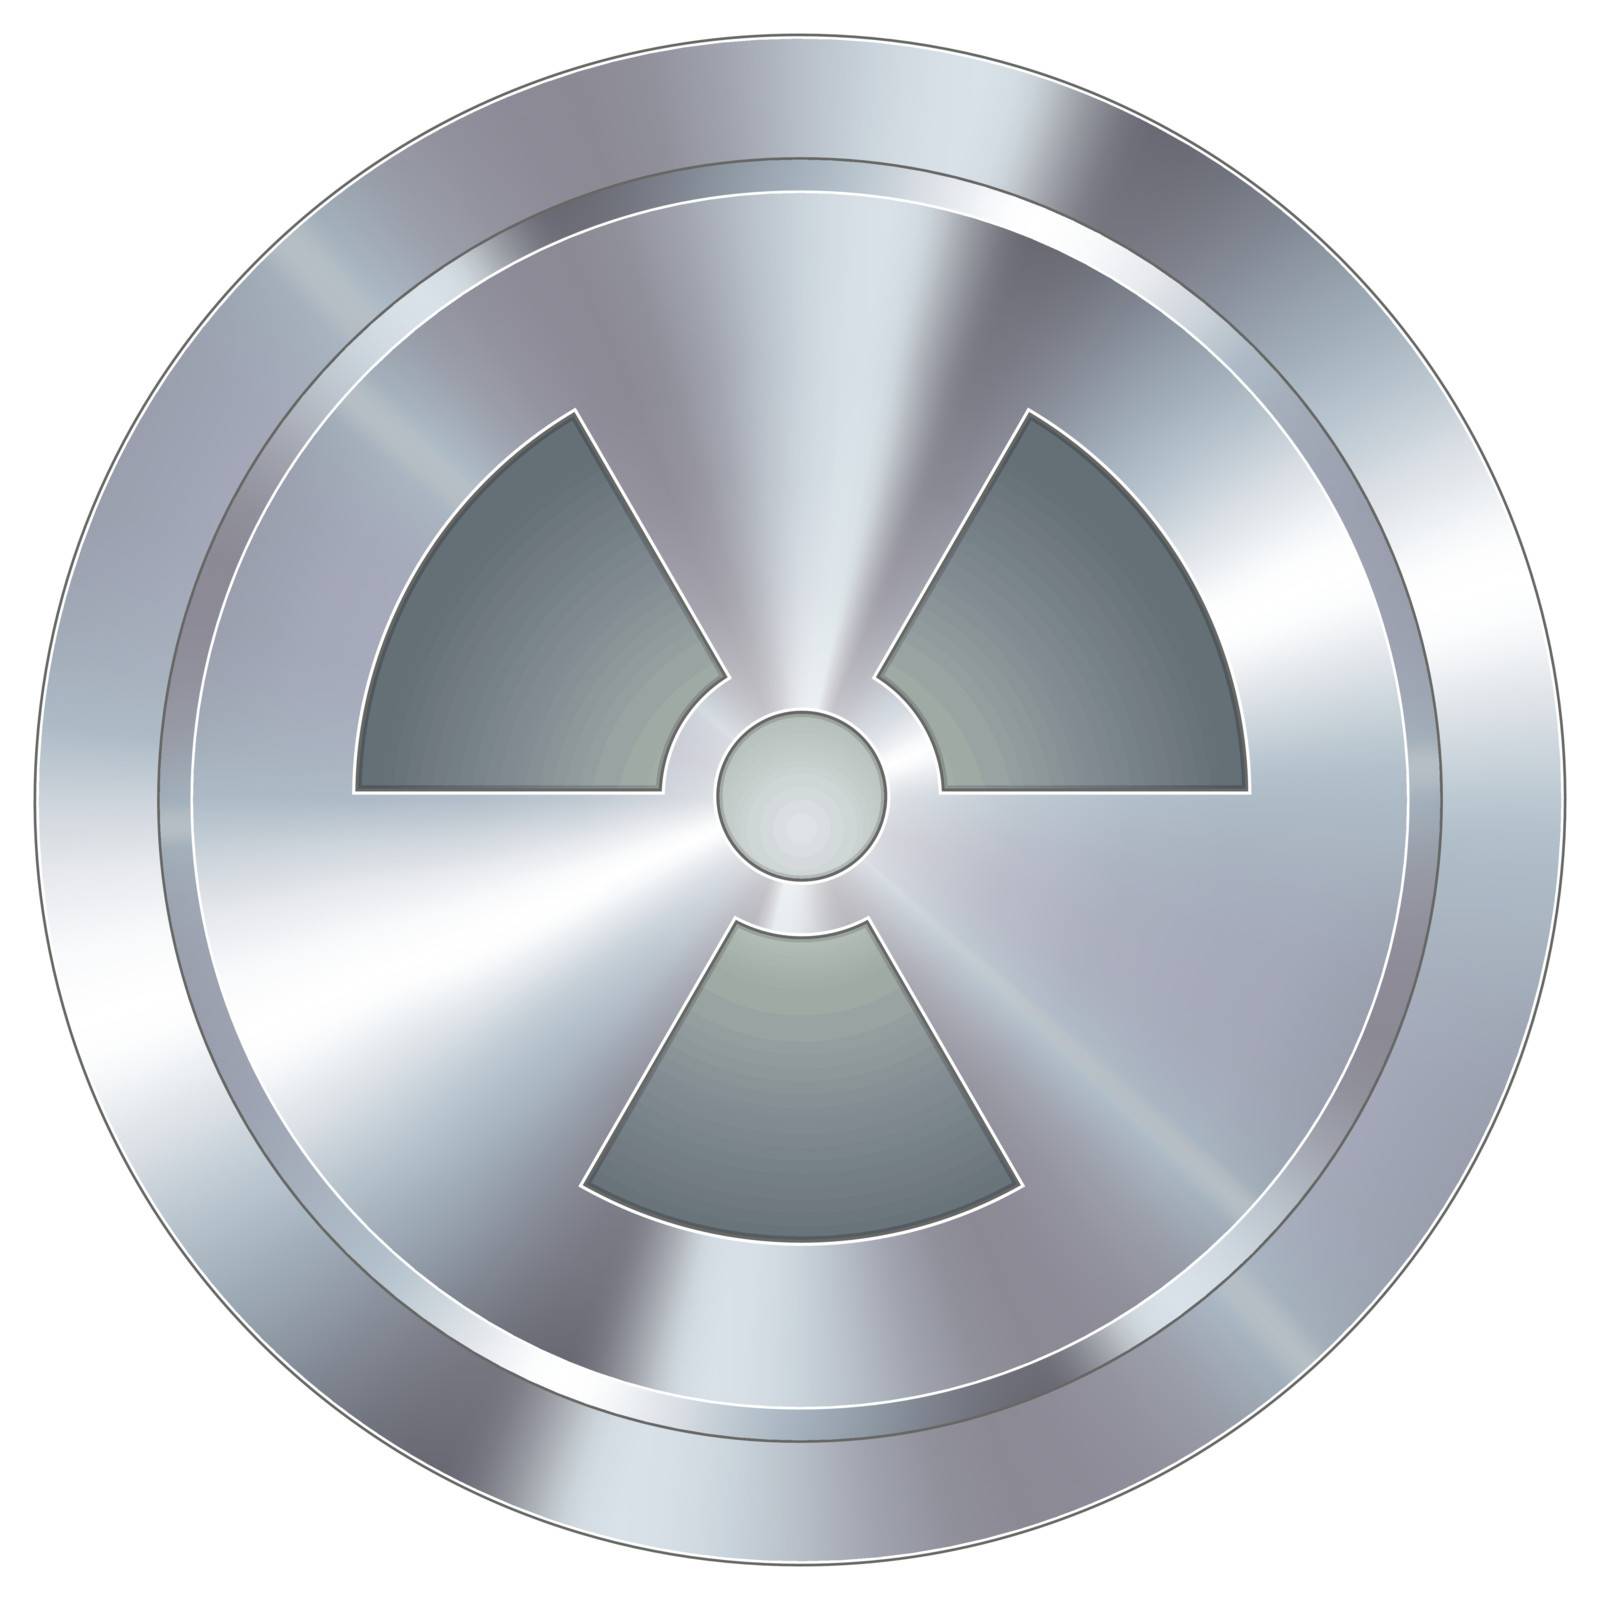 Radioactive warning icon on round stainless steel modern industrial button